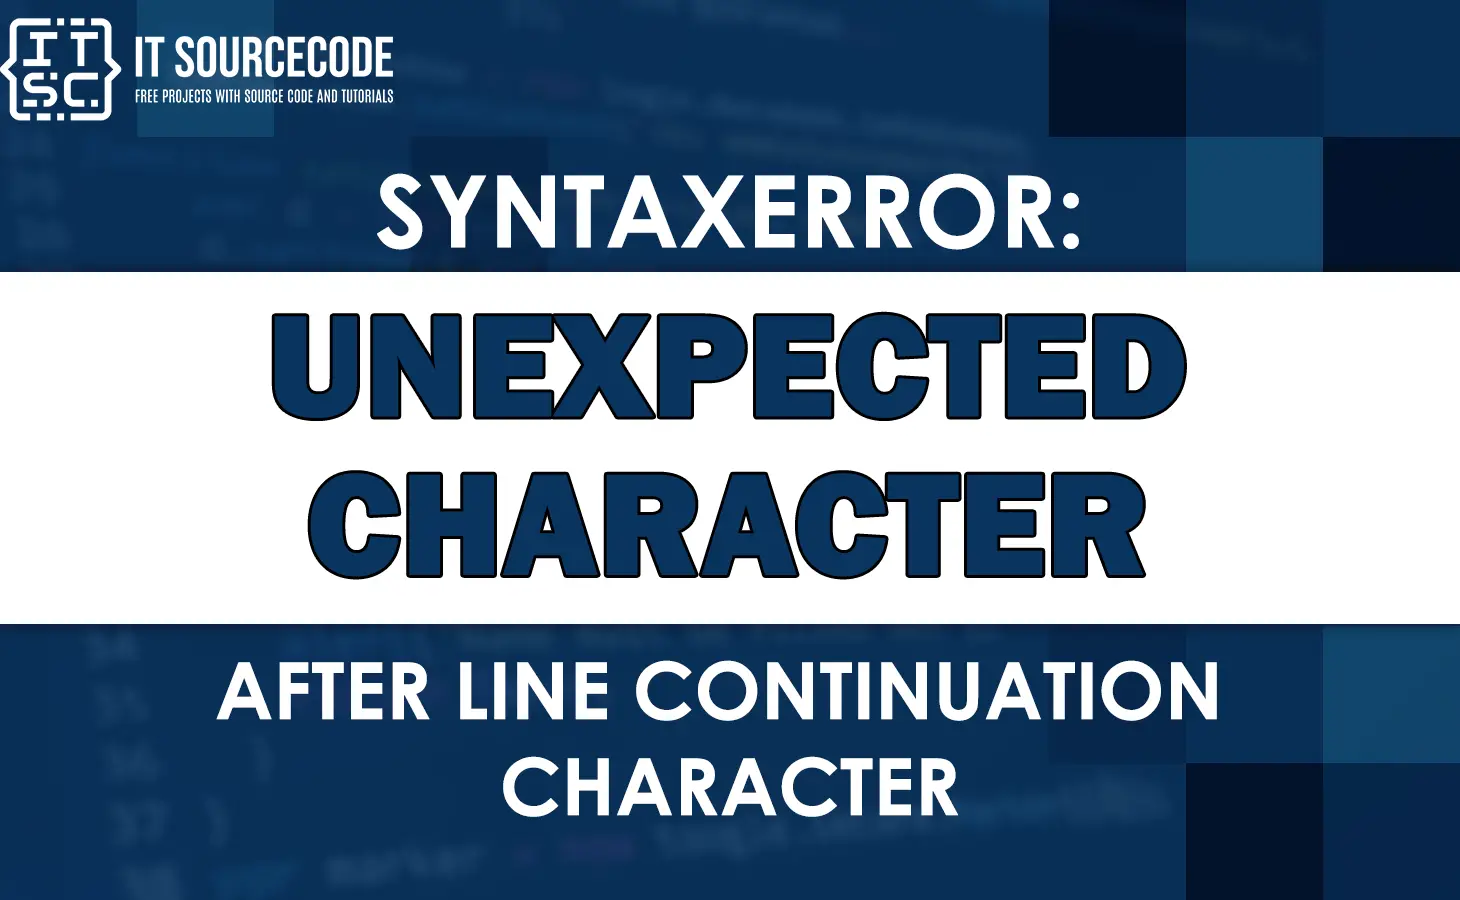 Syntaxerror: Unexpected Character After Line Continuation Character